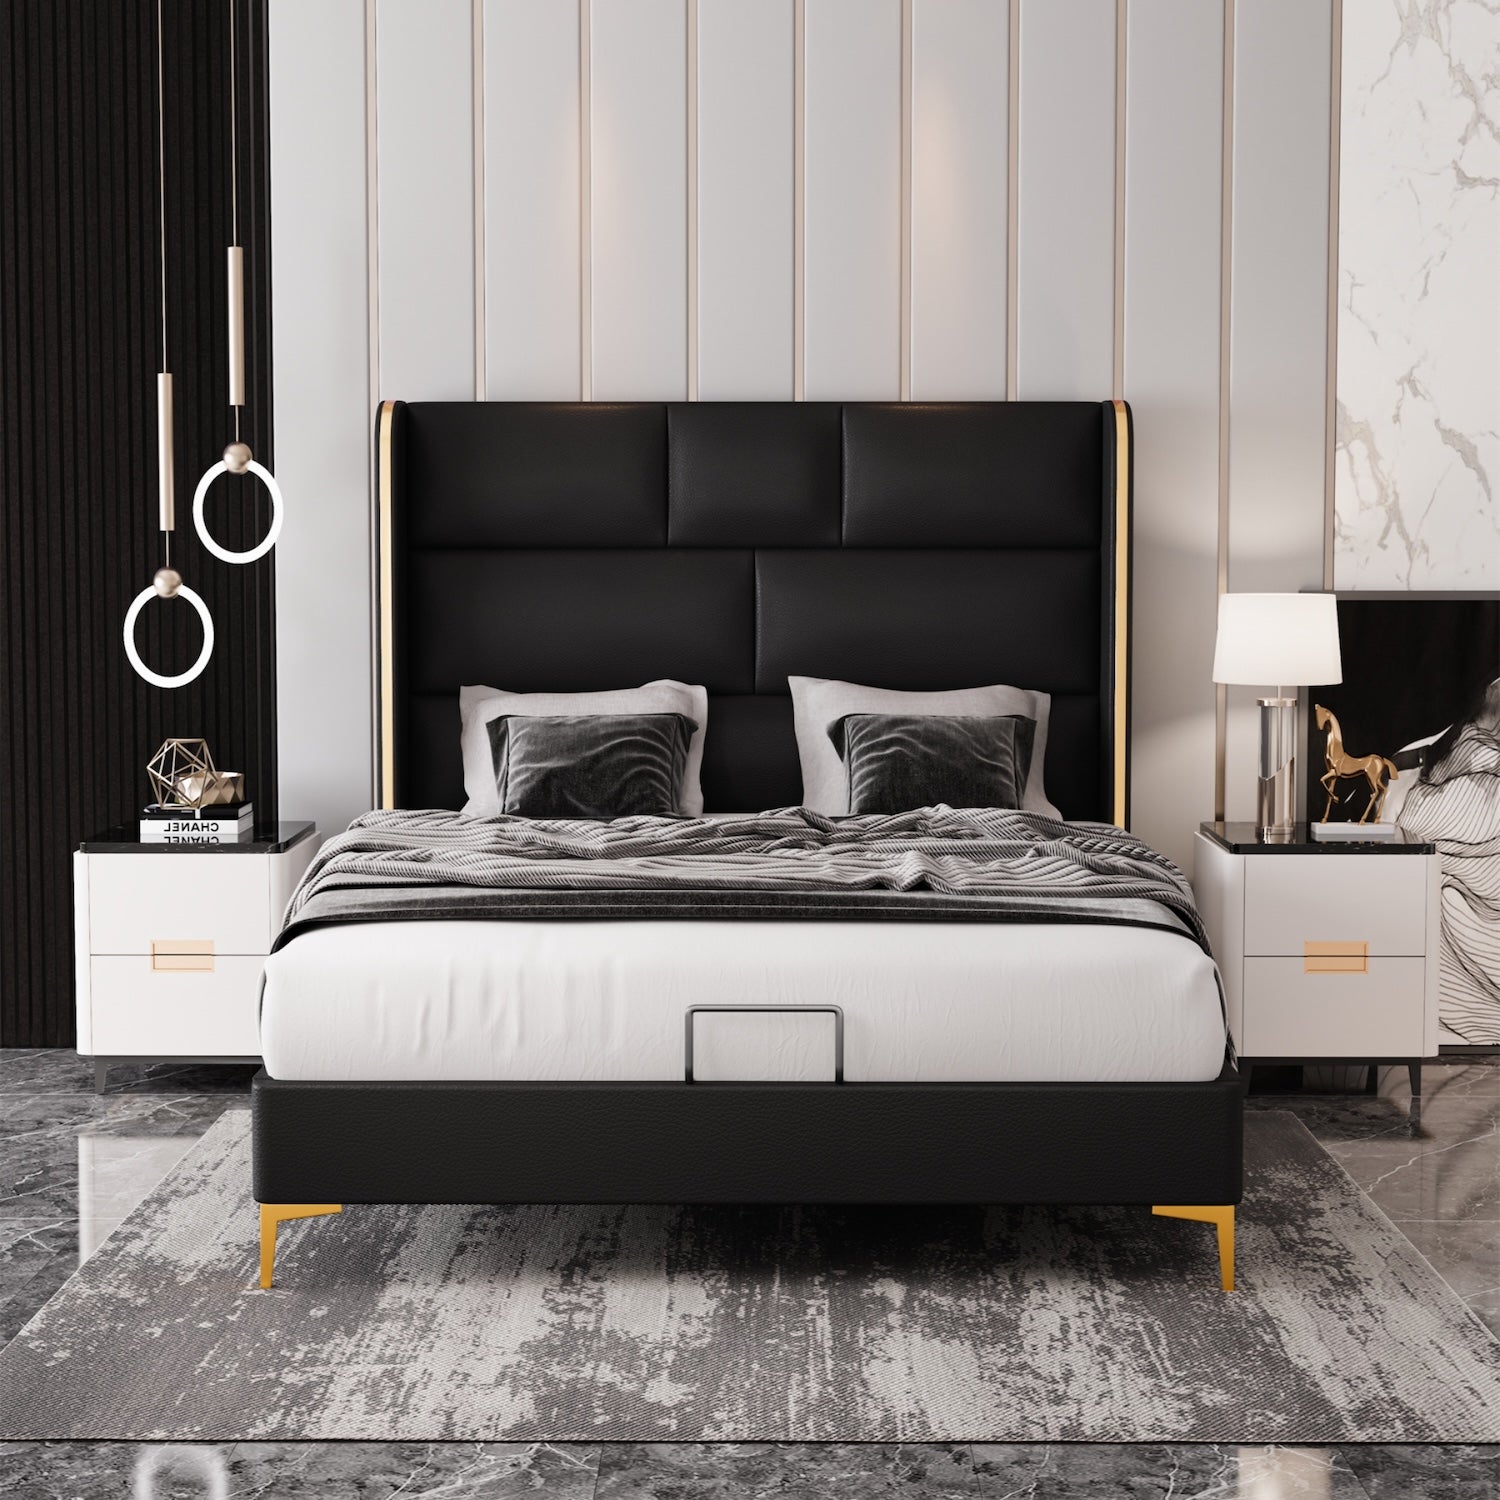 DeeJay 56" Faux Leather Queen Platform Bed - Black & Gold